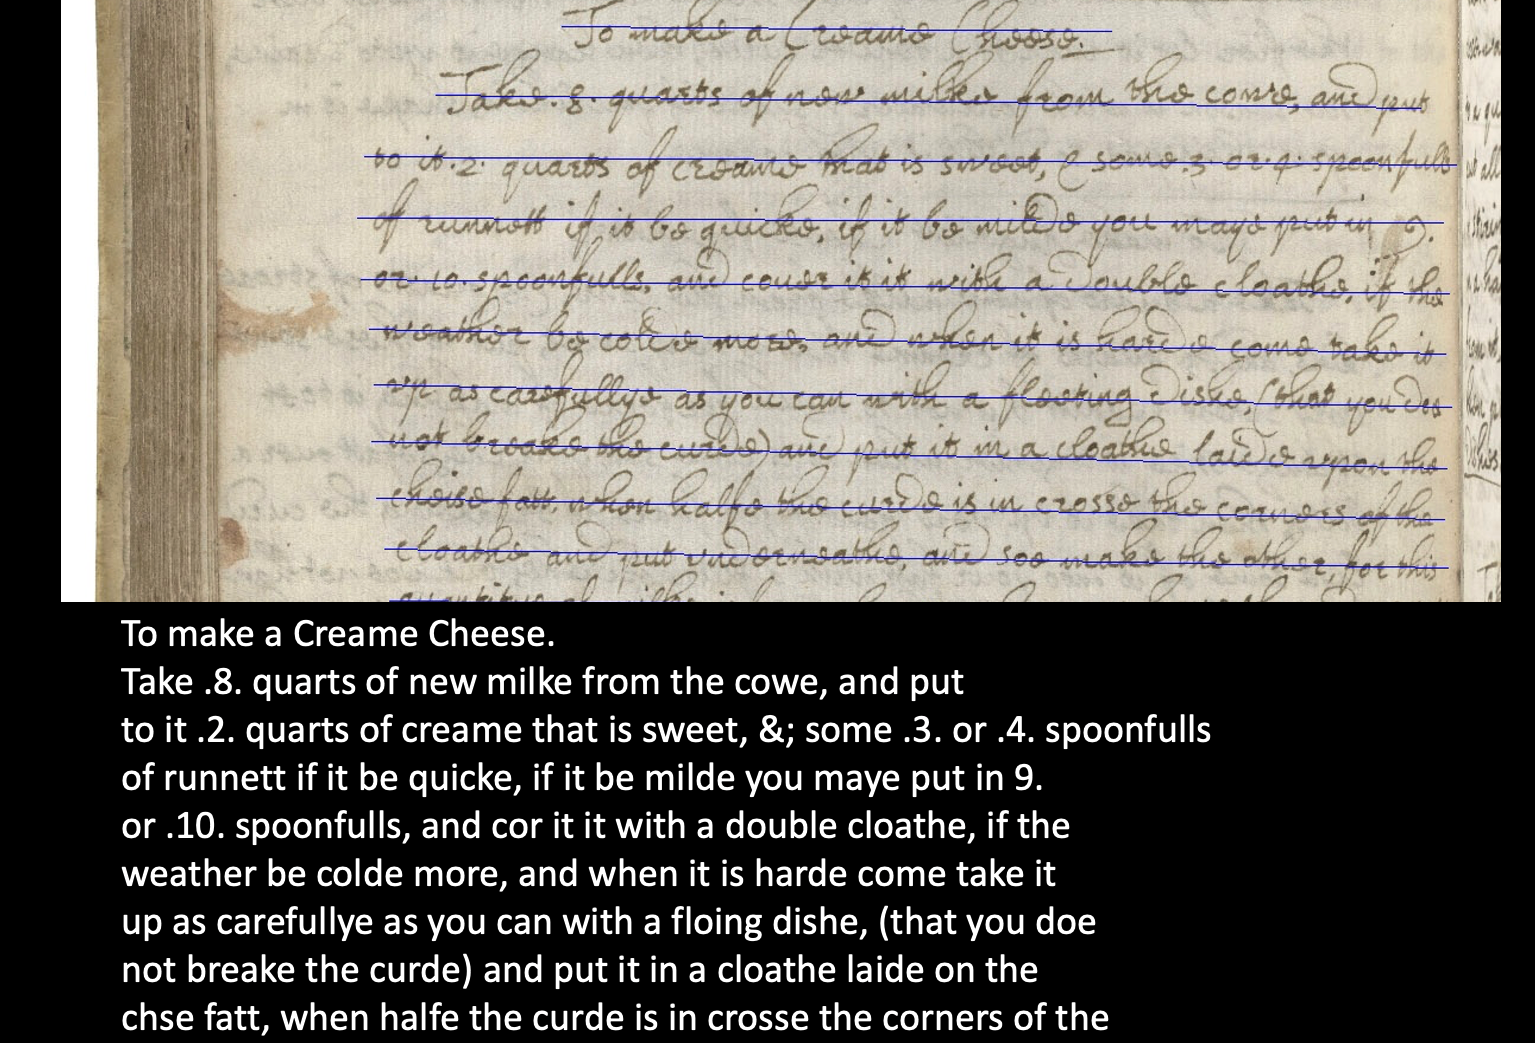 Volunteer transcription of an early modern creame cheese recipe.